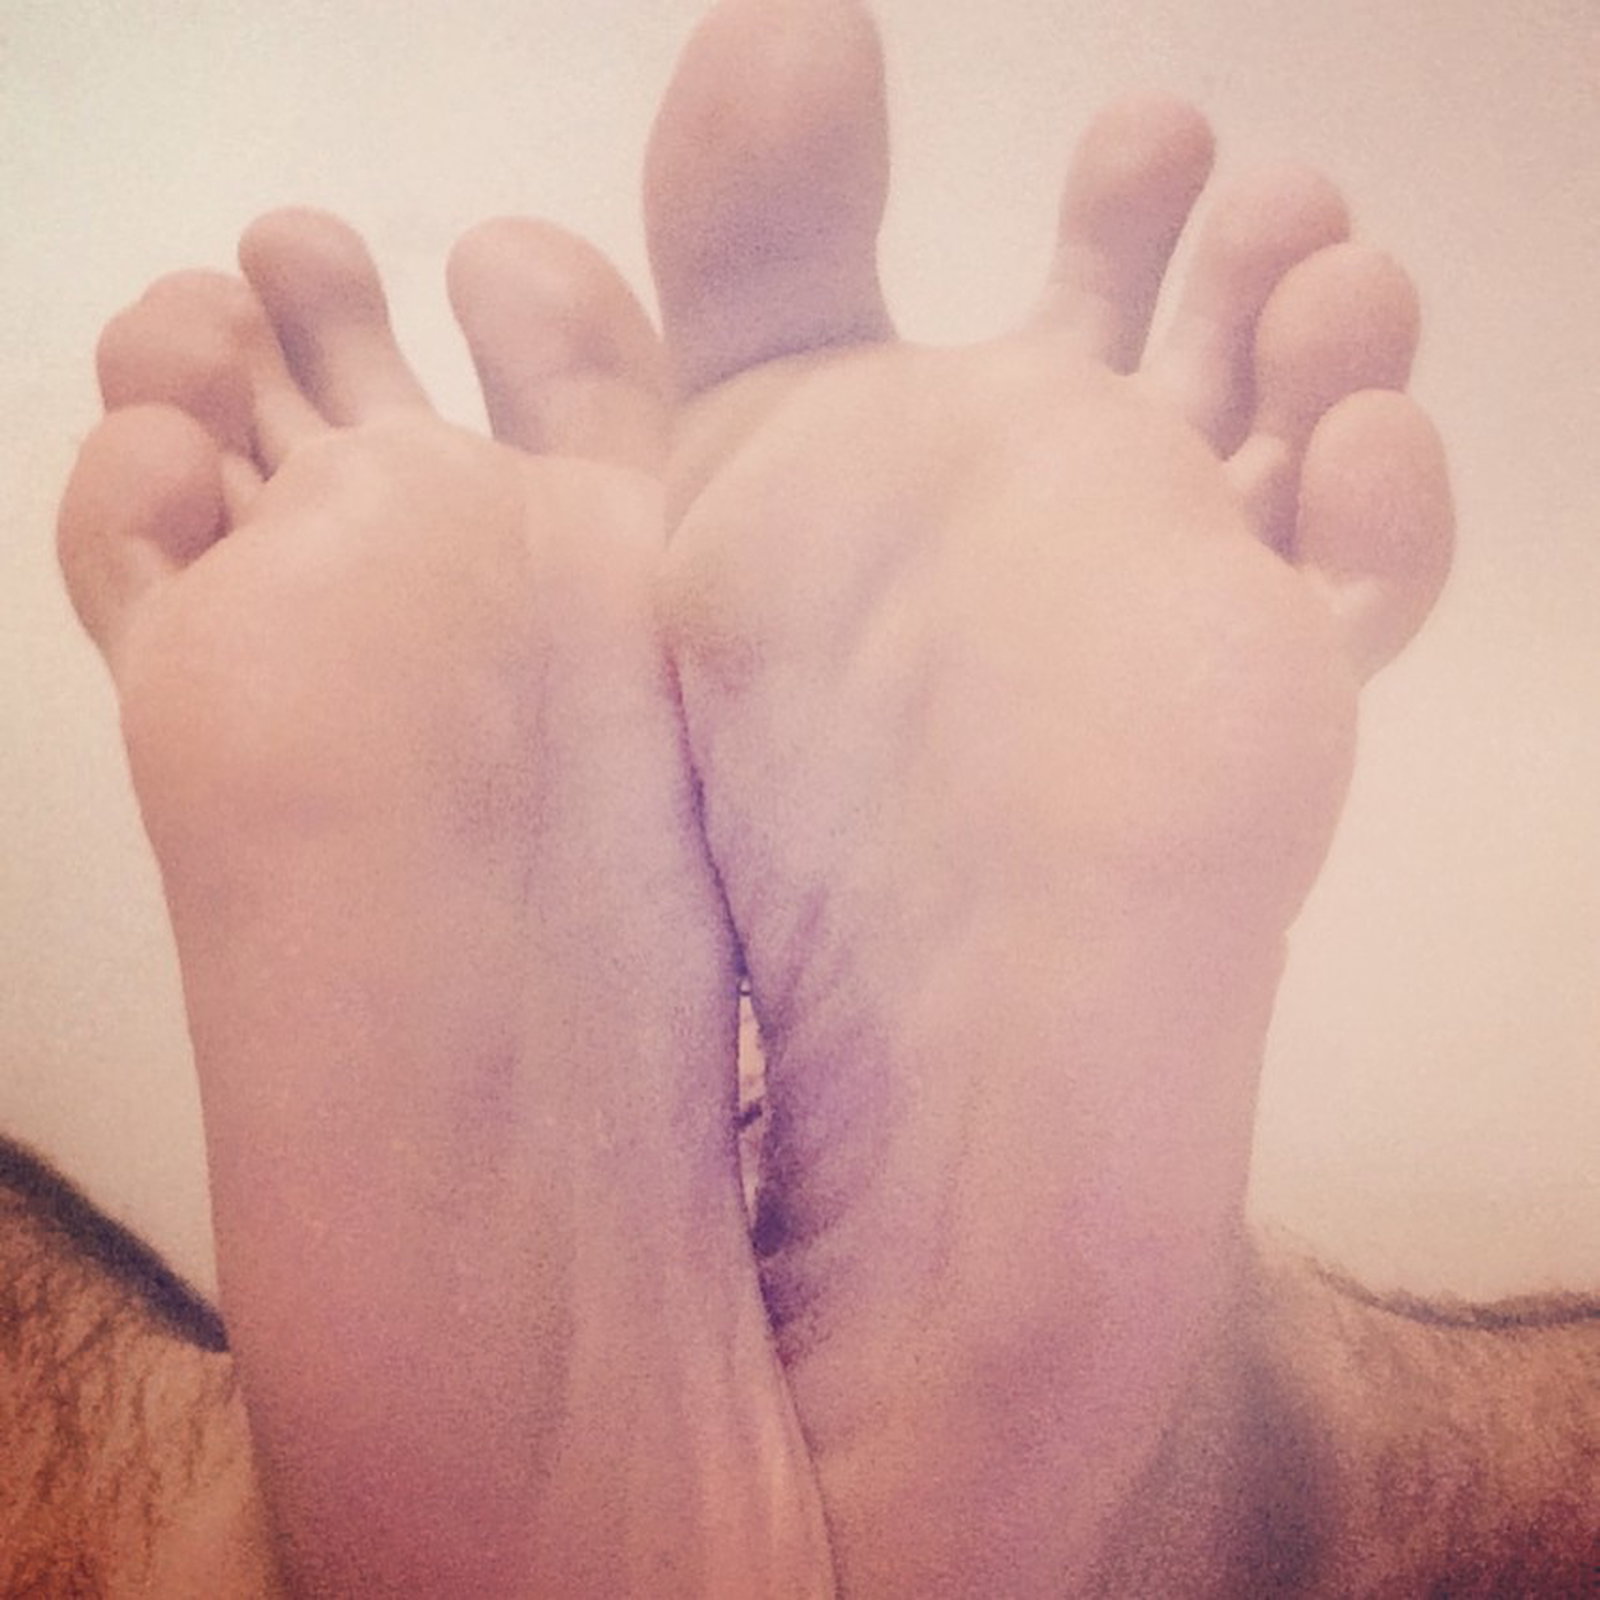 Photo by want2plzu22014 with the username @want2plzu22014,  April 19, 2018 at 7:50 AM and the text says 'twistedbatortrash:

My personal touch #malefeet  #malesoles #gayfeet #malefootfetish'